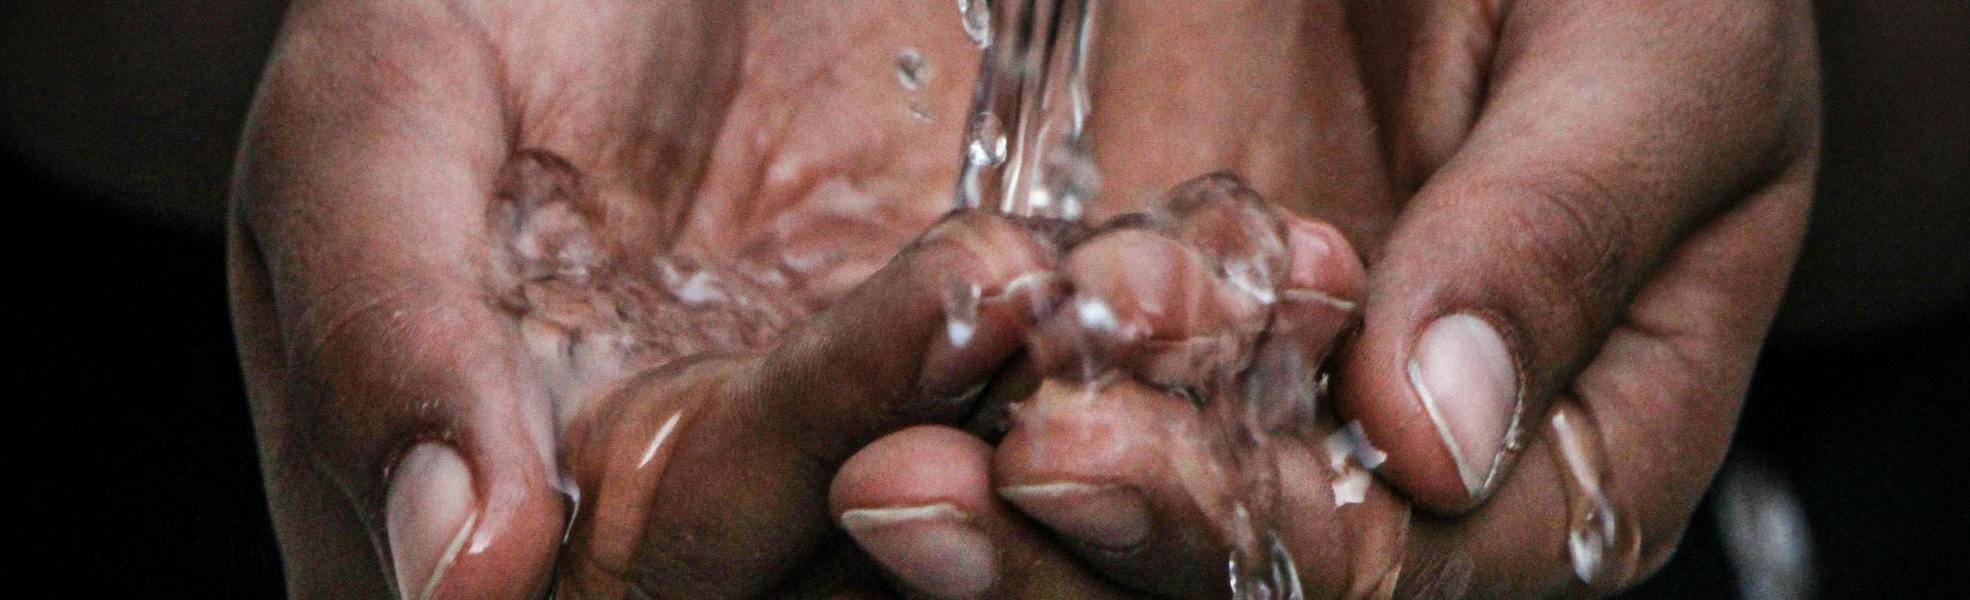 Water, hygiene and health